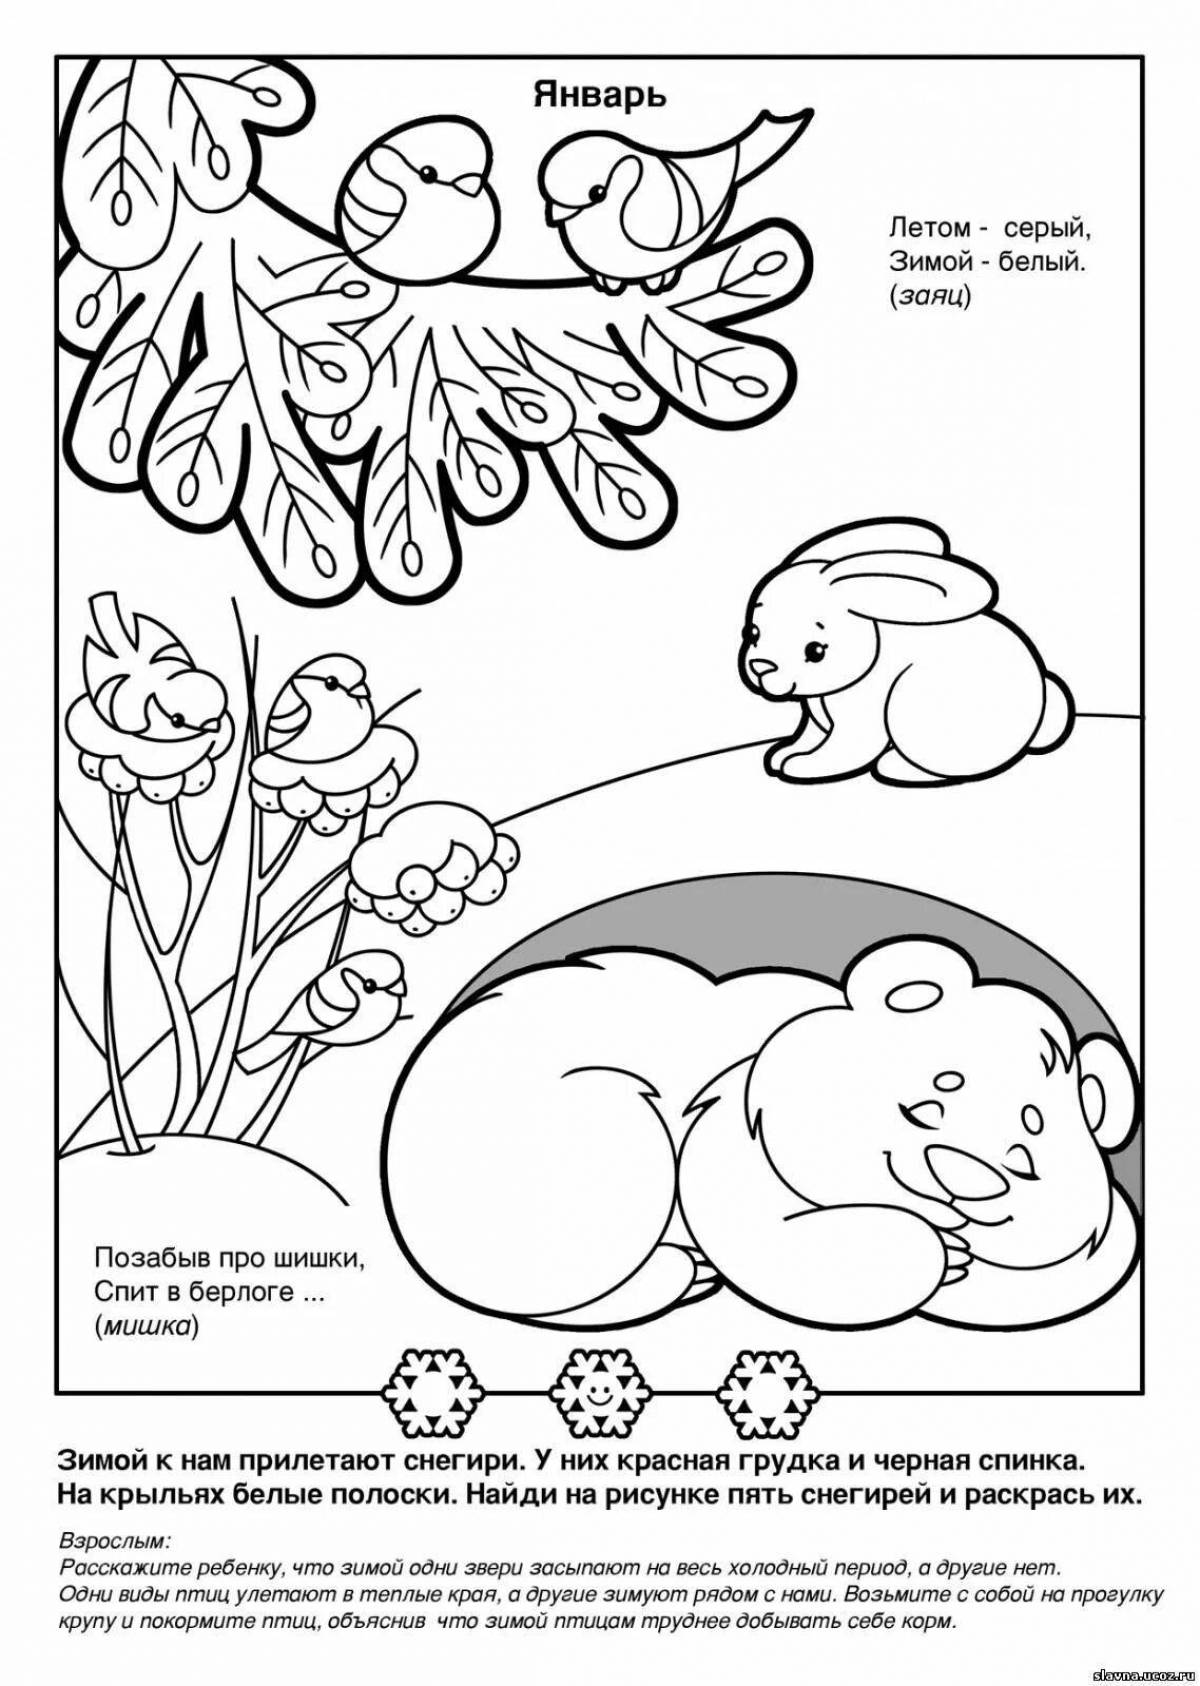 Serene coloring page: why do bears sleep in winter?